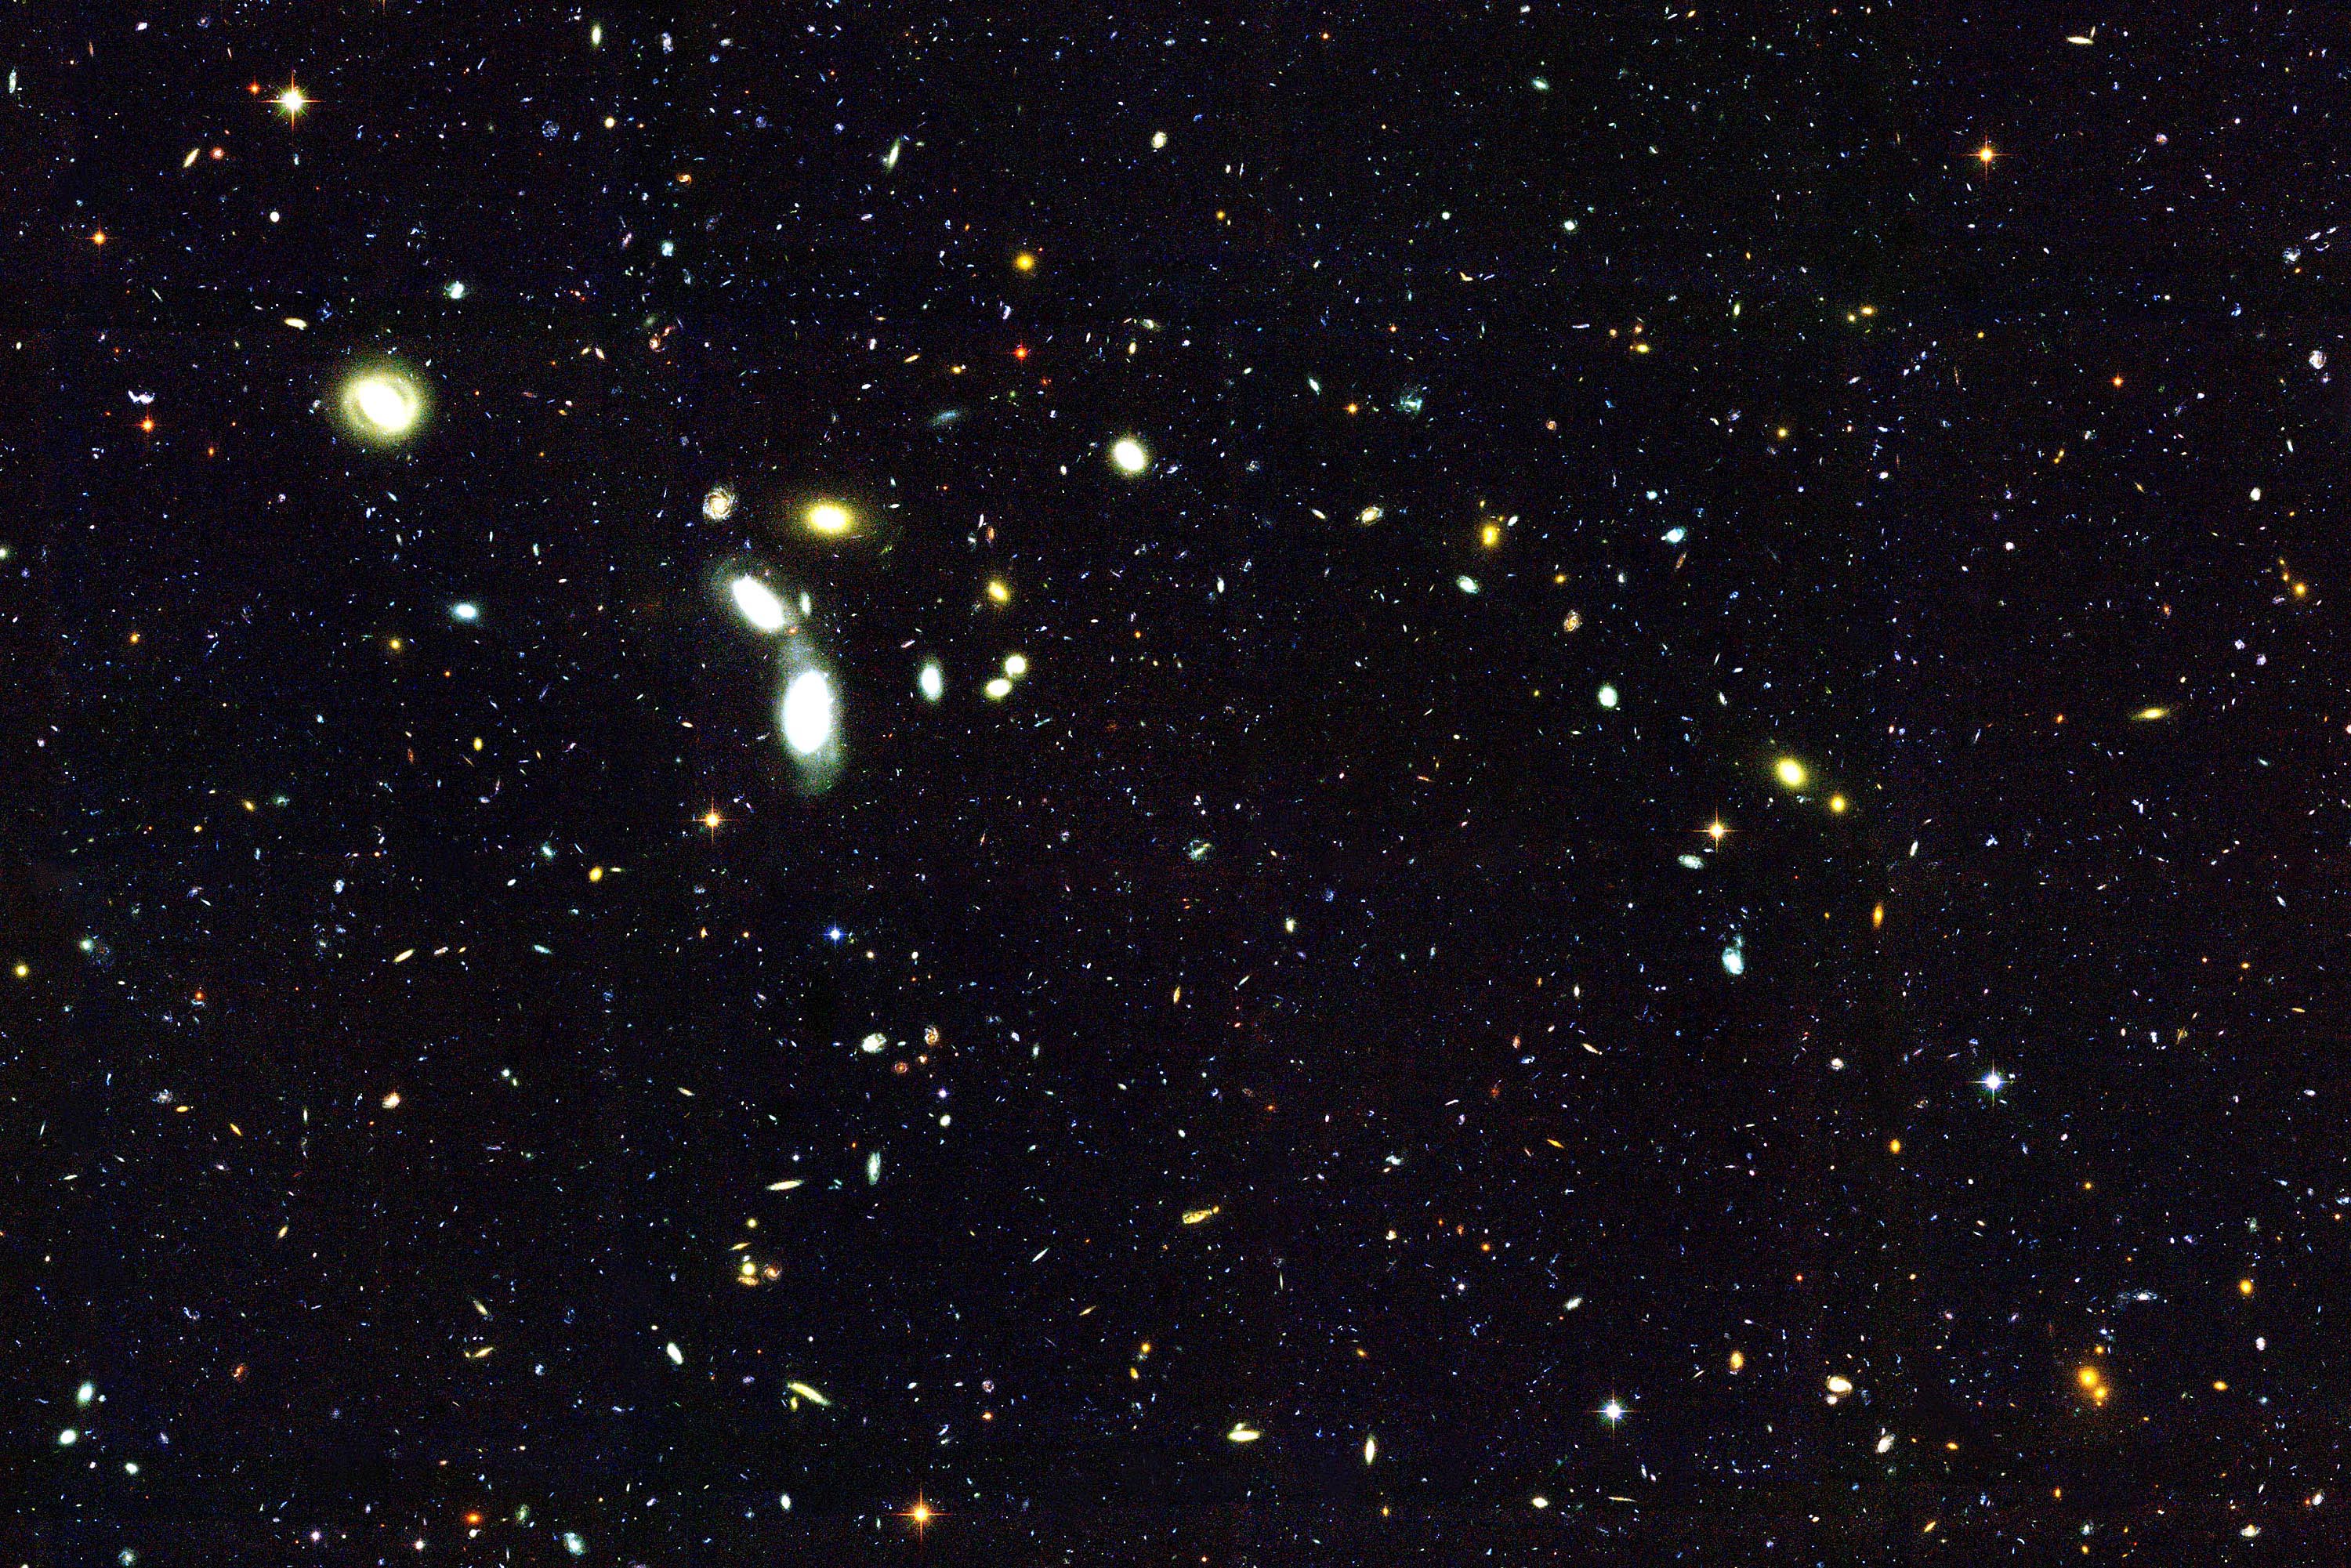 NASA's Hubble Space Telescope reached back to nearly the beginning of time to sample thousands of infant galaxies. This image, taken with Hubble's Advanced Camera for Surveys, shows several thousand galaxies, many of which appear to be interacting or in the process of forming. (NASA—WireImage)